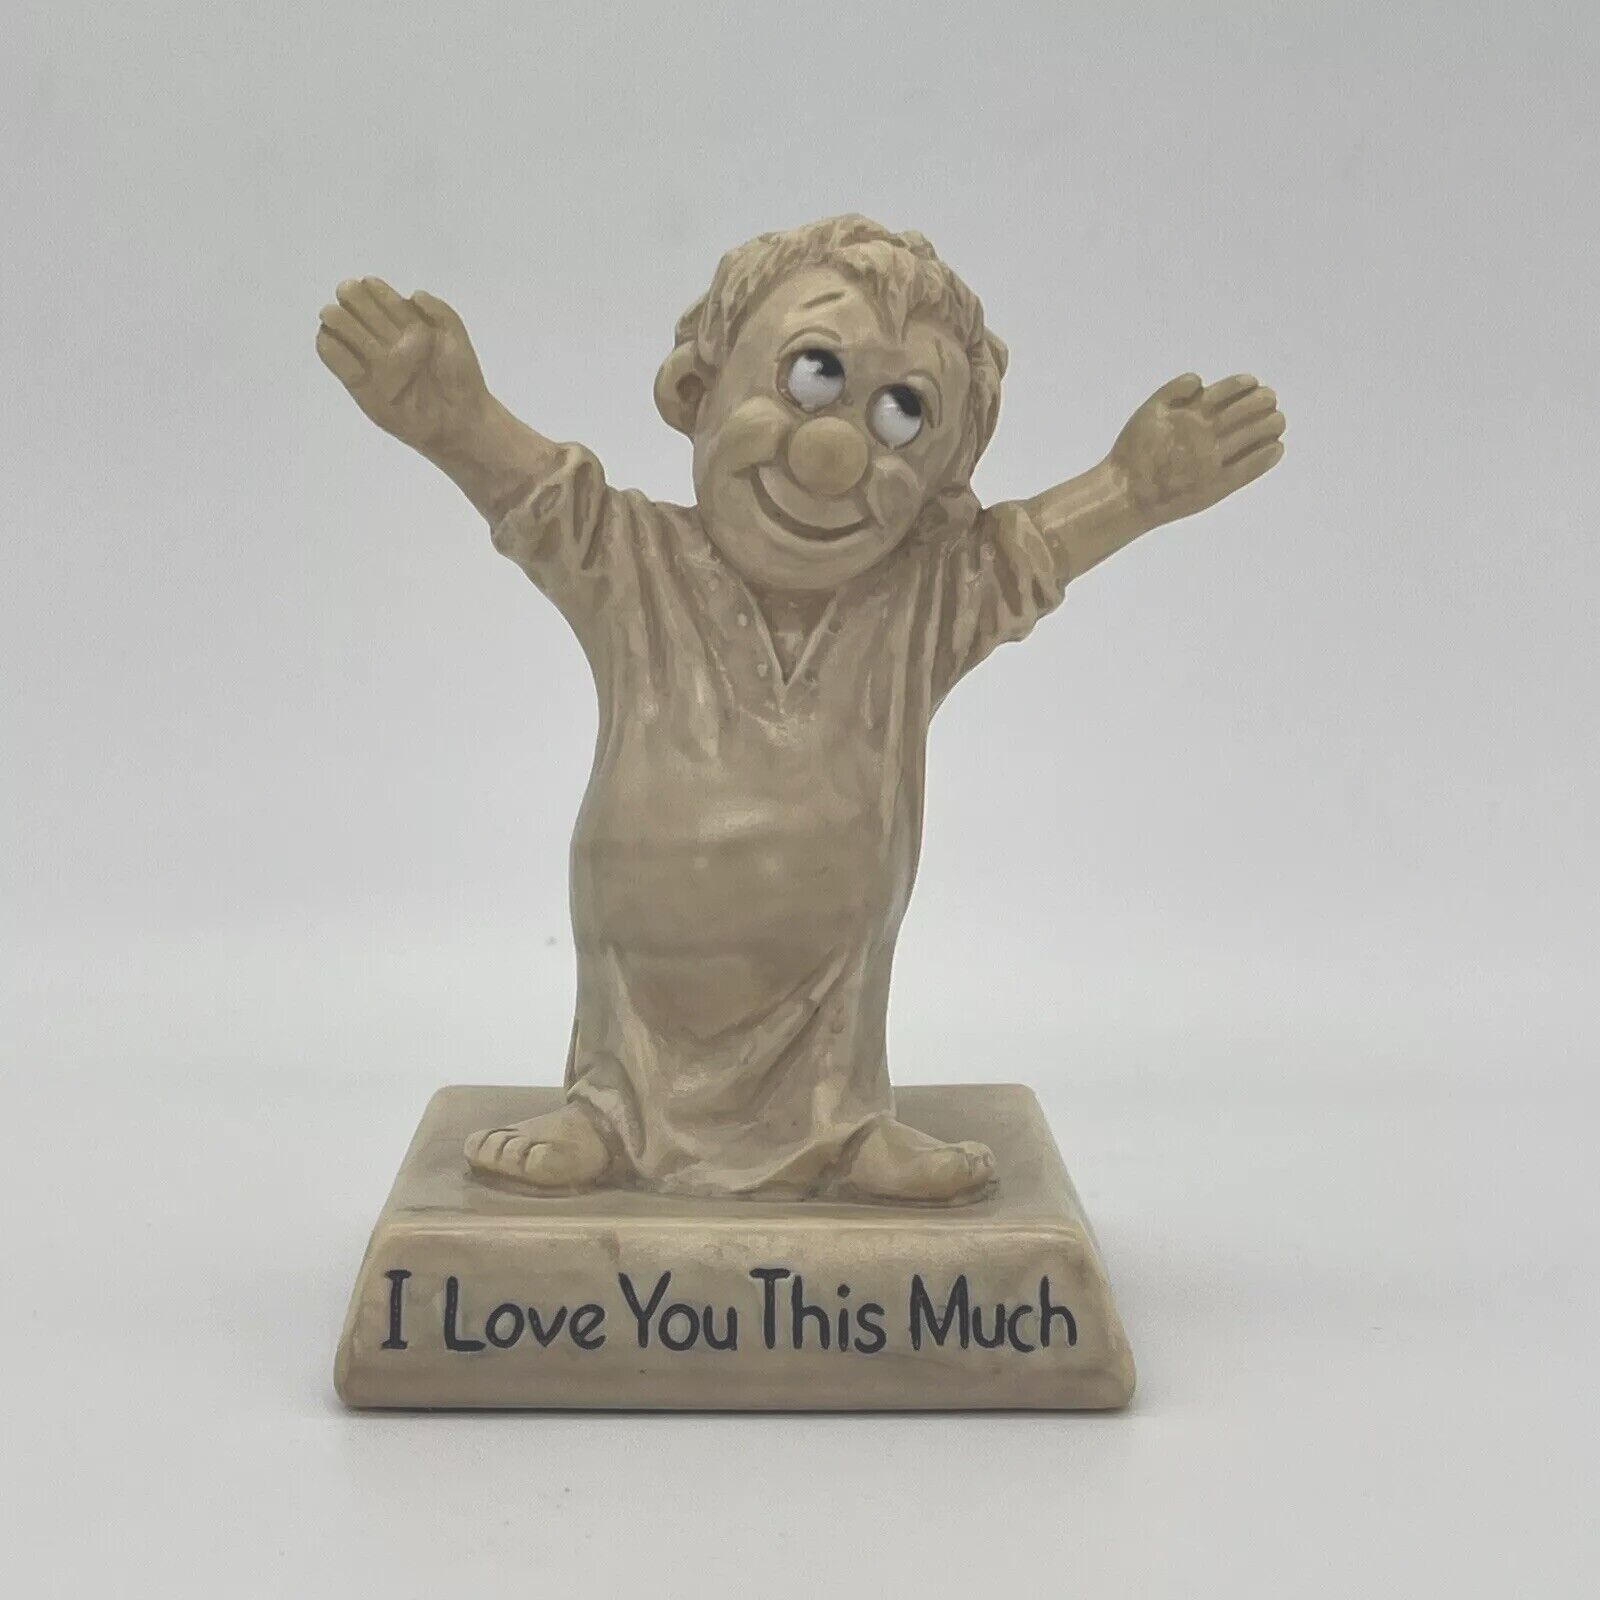 VTG I LOVE YOU THIS MUCH 1968 Figurine Statue by R & W Berries CO’s 5” H 3” W